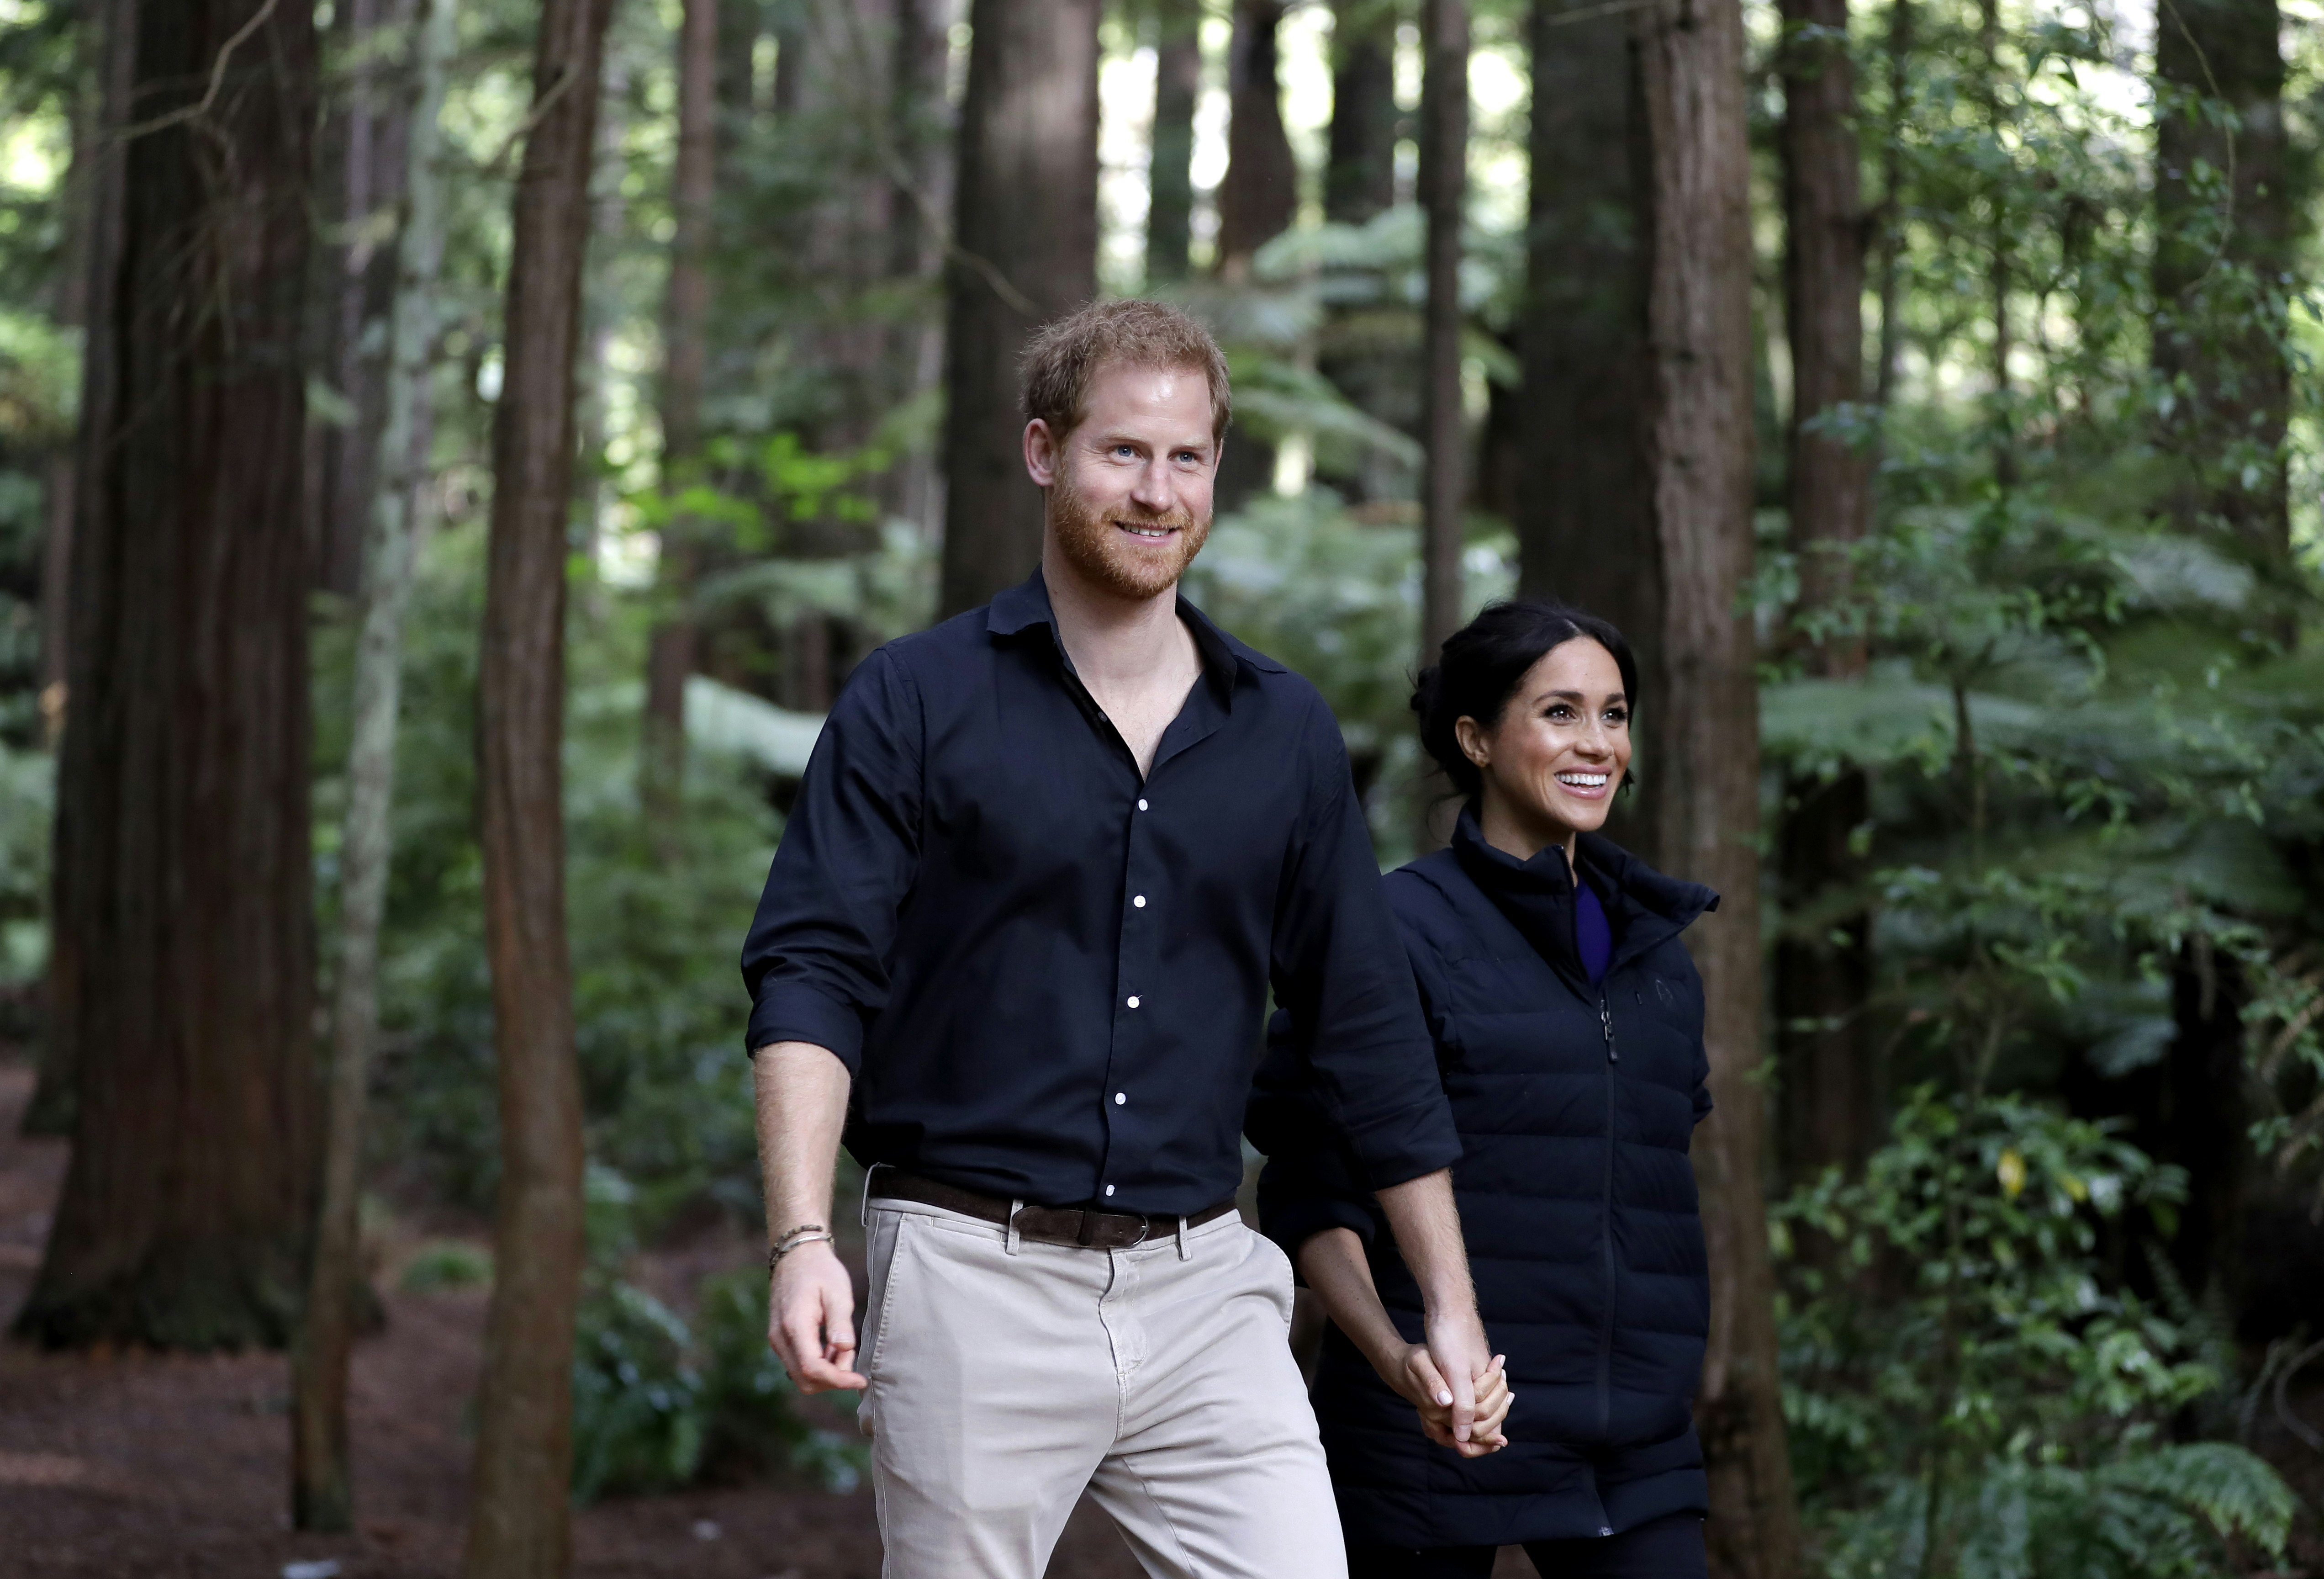 Prince Harry and Meghan Markle walk hand-in-hand in a redwood forest.